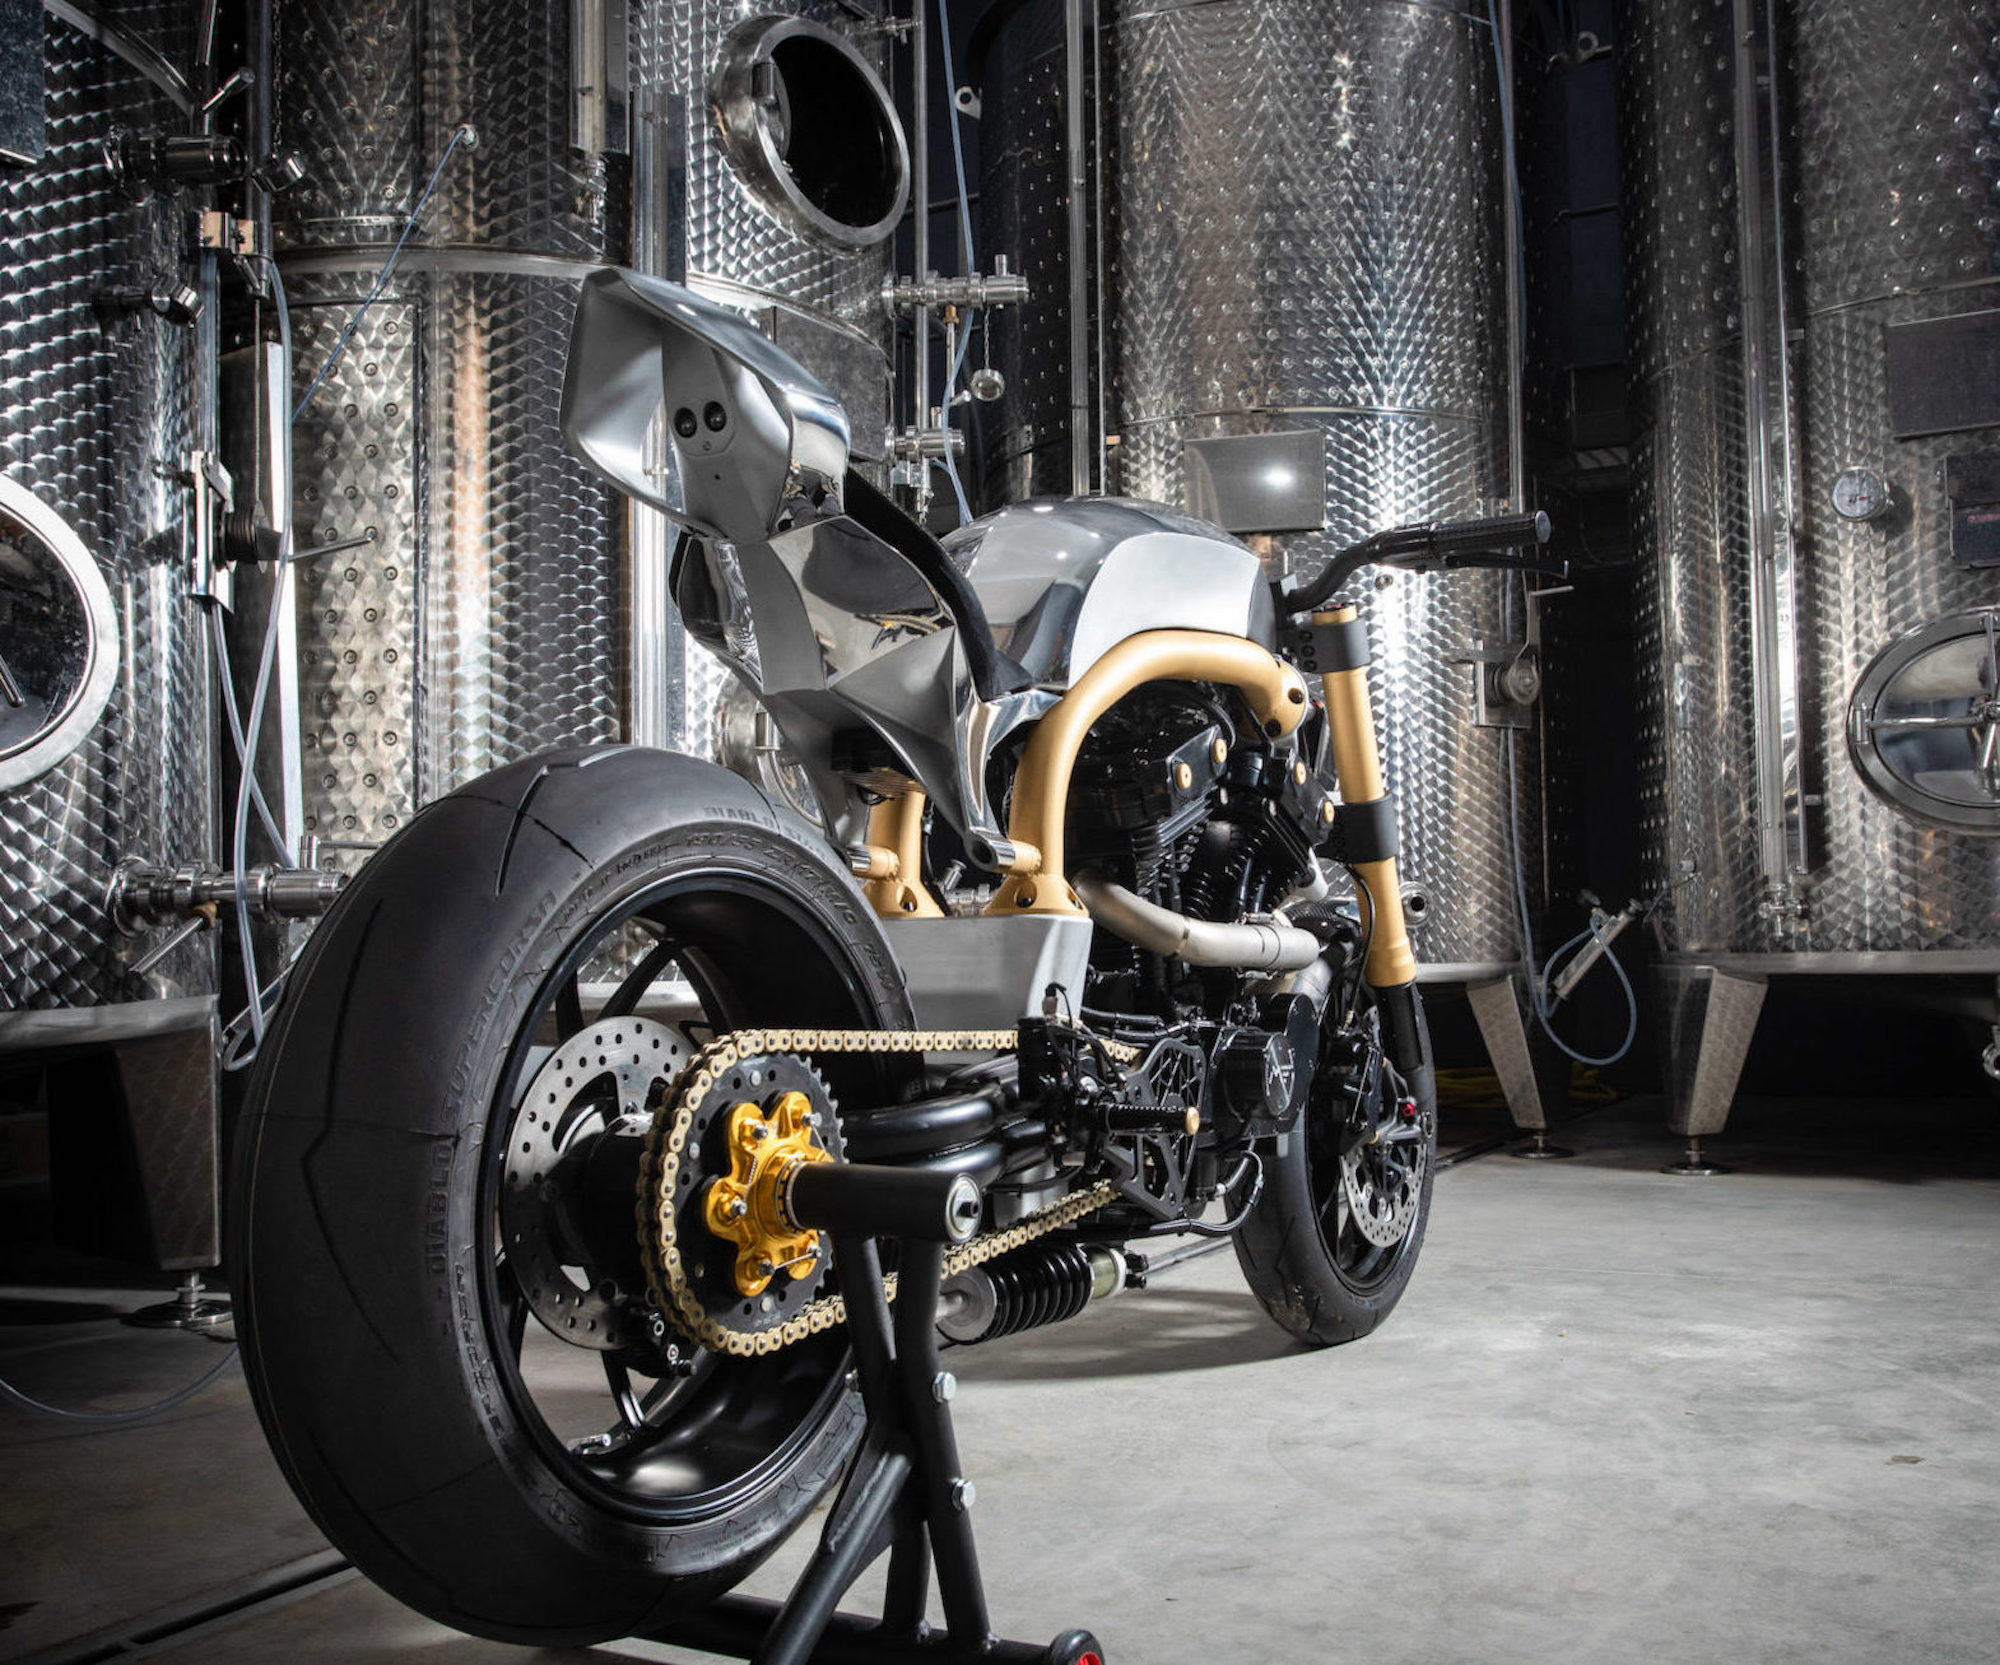 A chromed out custom Buell S1, courtesy of the team at RD Customs - specifically Messina and Michel.